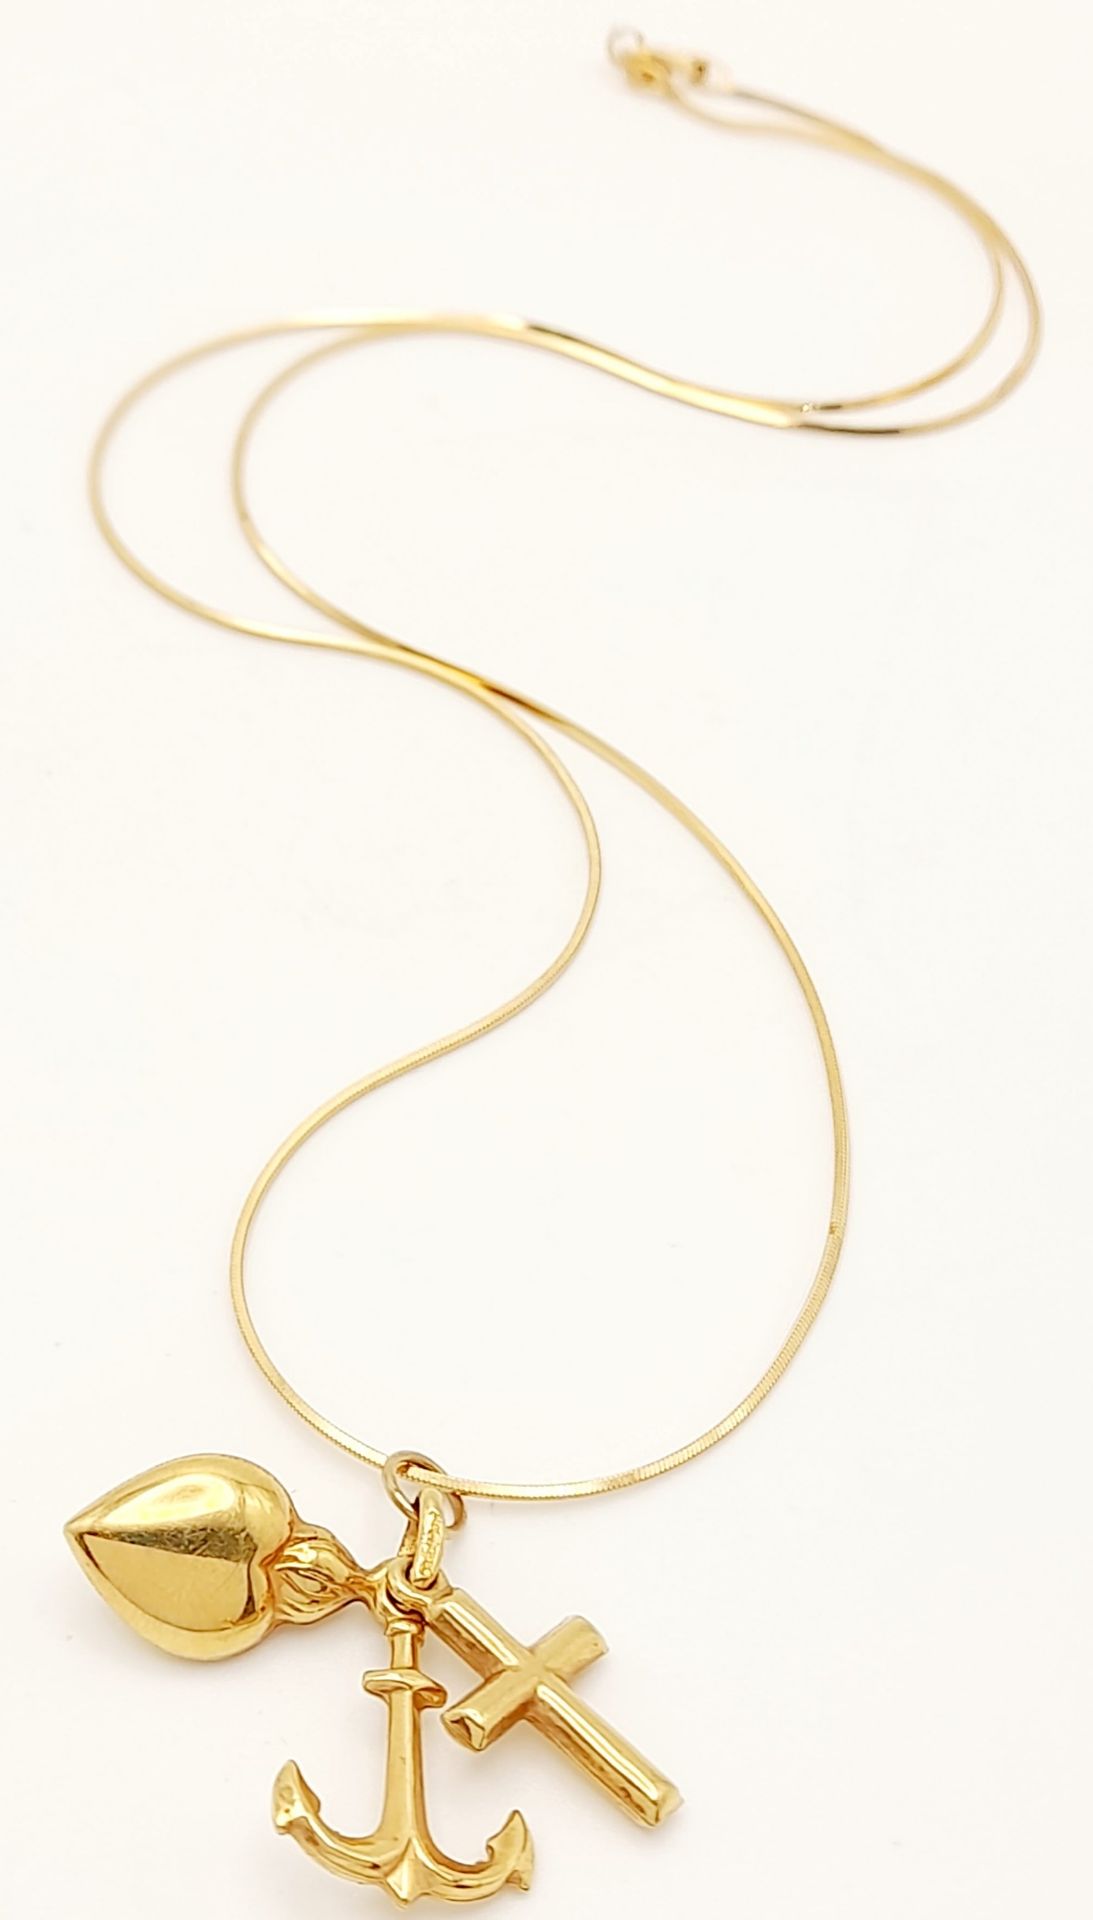 A 9k yellow gold box chain necklace with a 9k yellow gold faith, hope and love pendant, 4.1g total